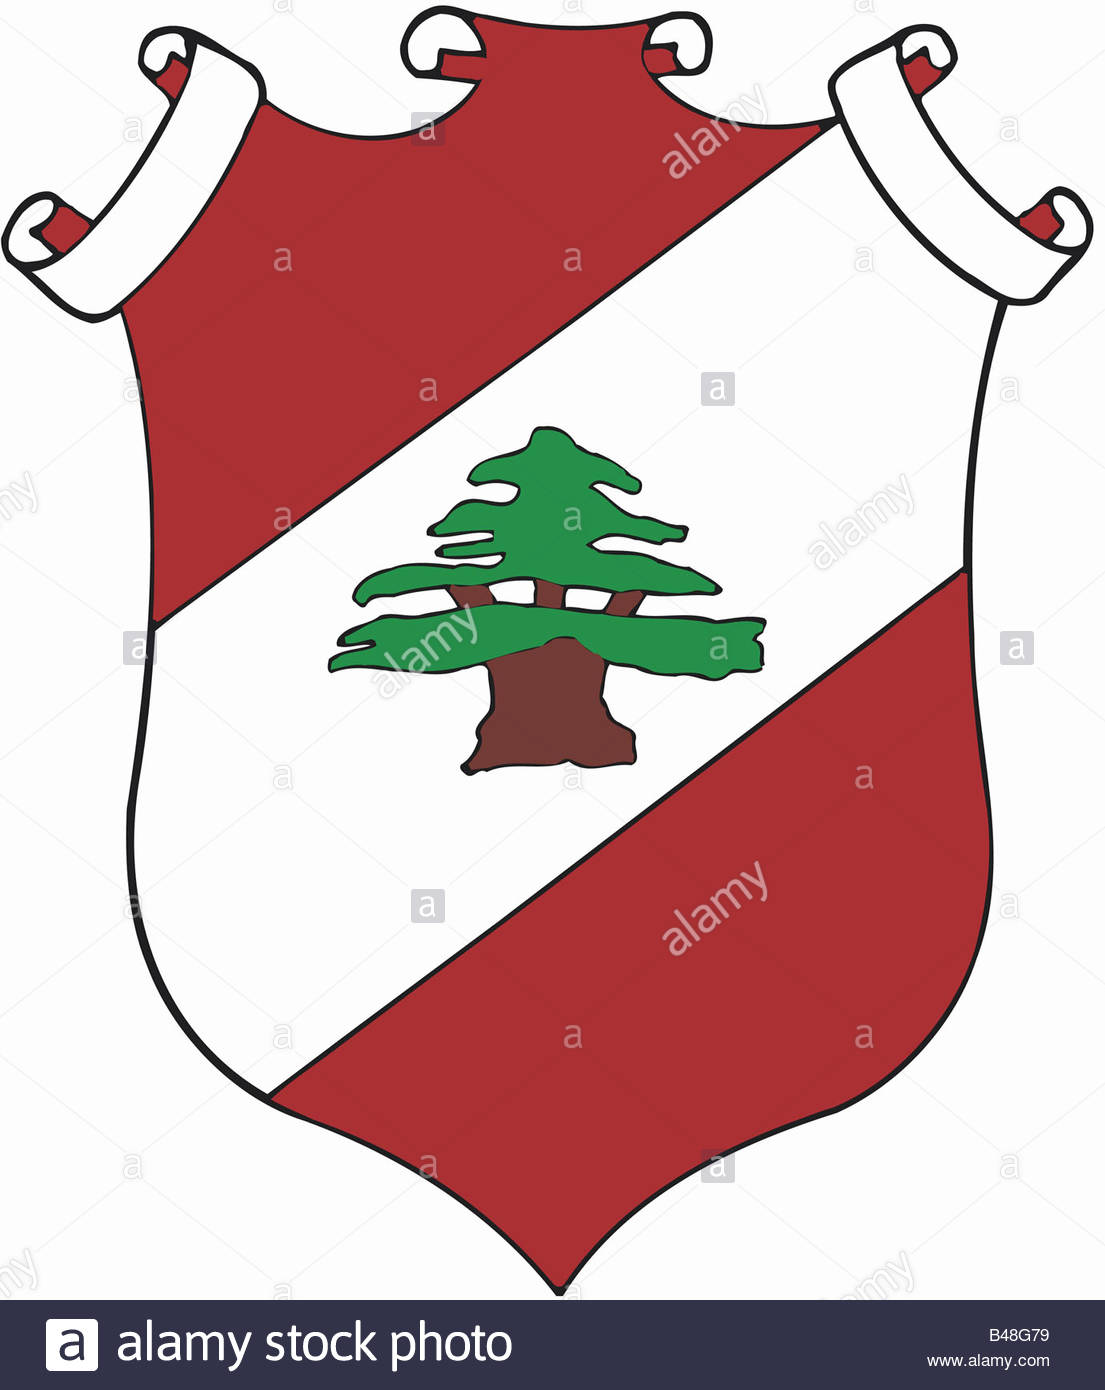 heraldry-coat-of-arms-lebanon-additional-rights-clearance-info-not-B48G79.jpg